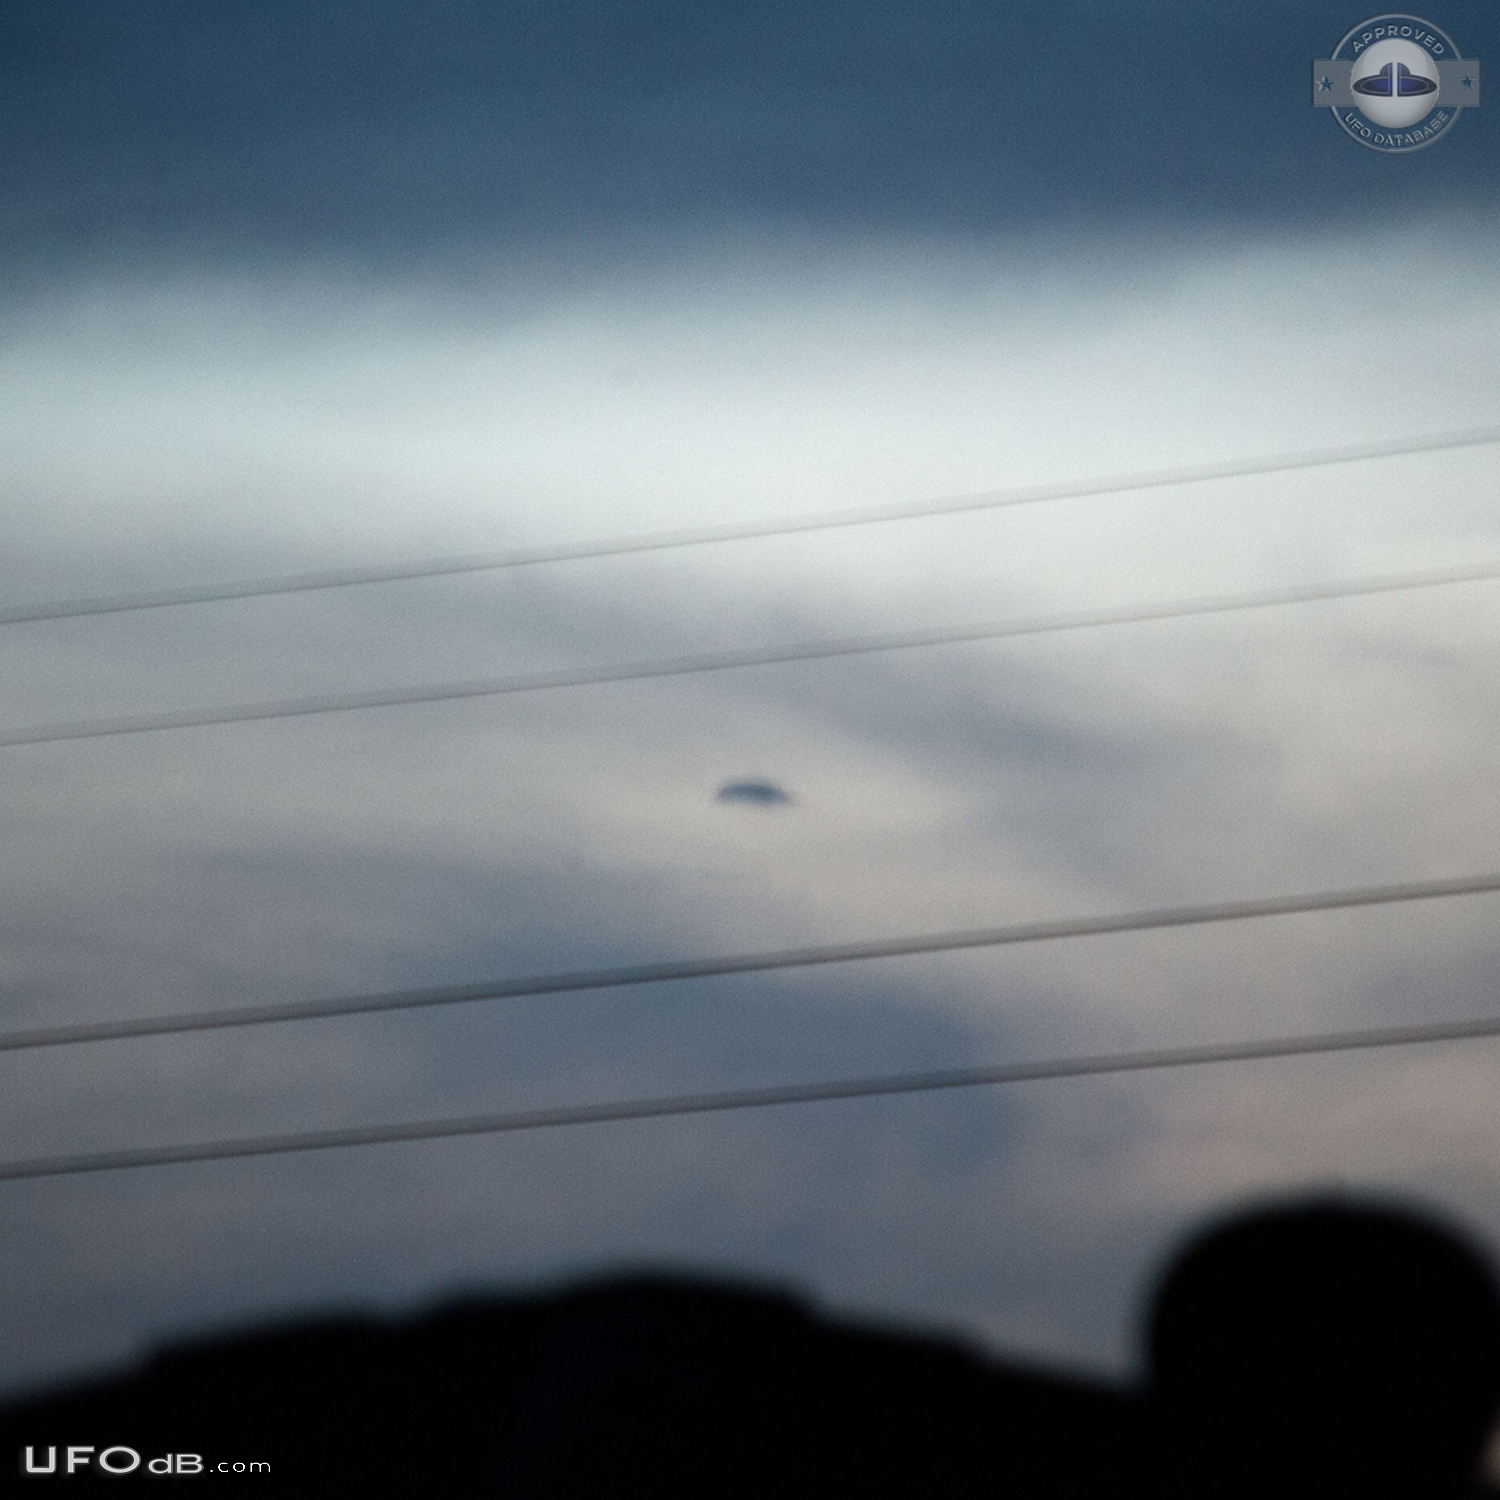 Hovering disc UFO moved then disappeared in the clouds Brisbane Queens UFO Picture #776-2